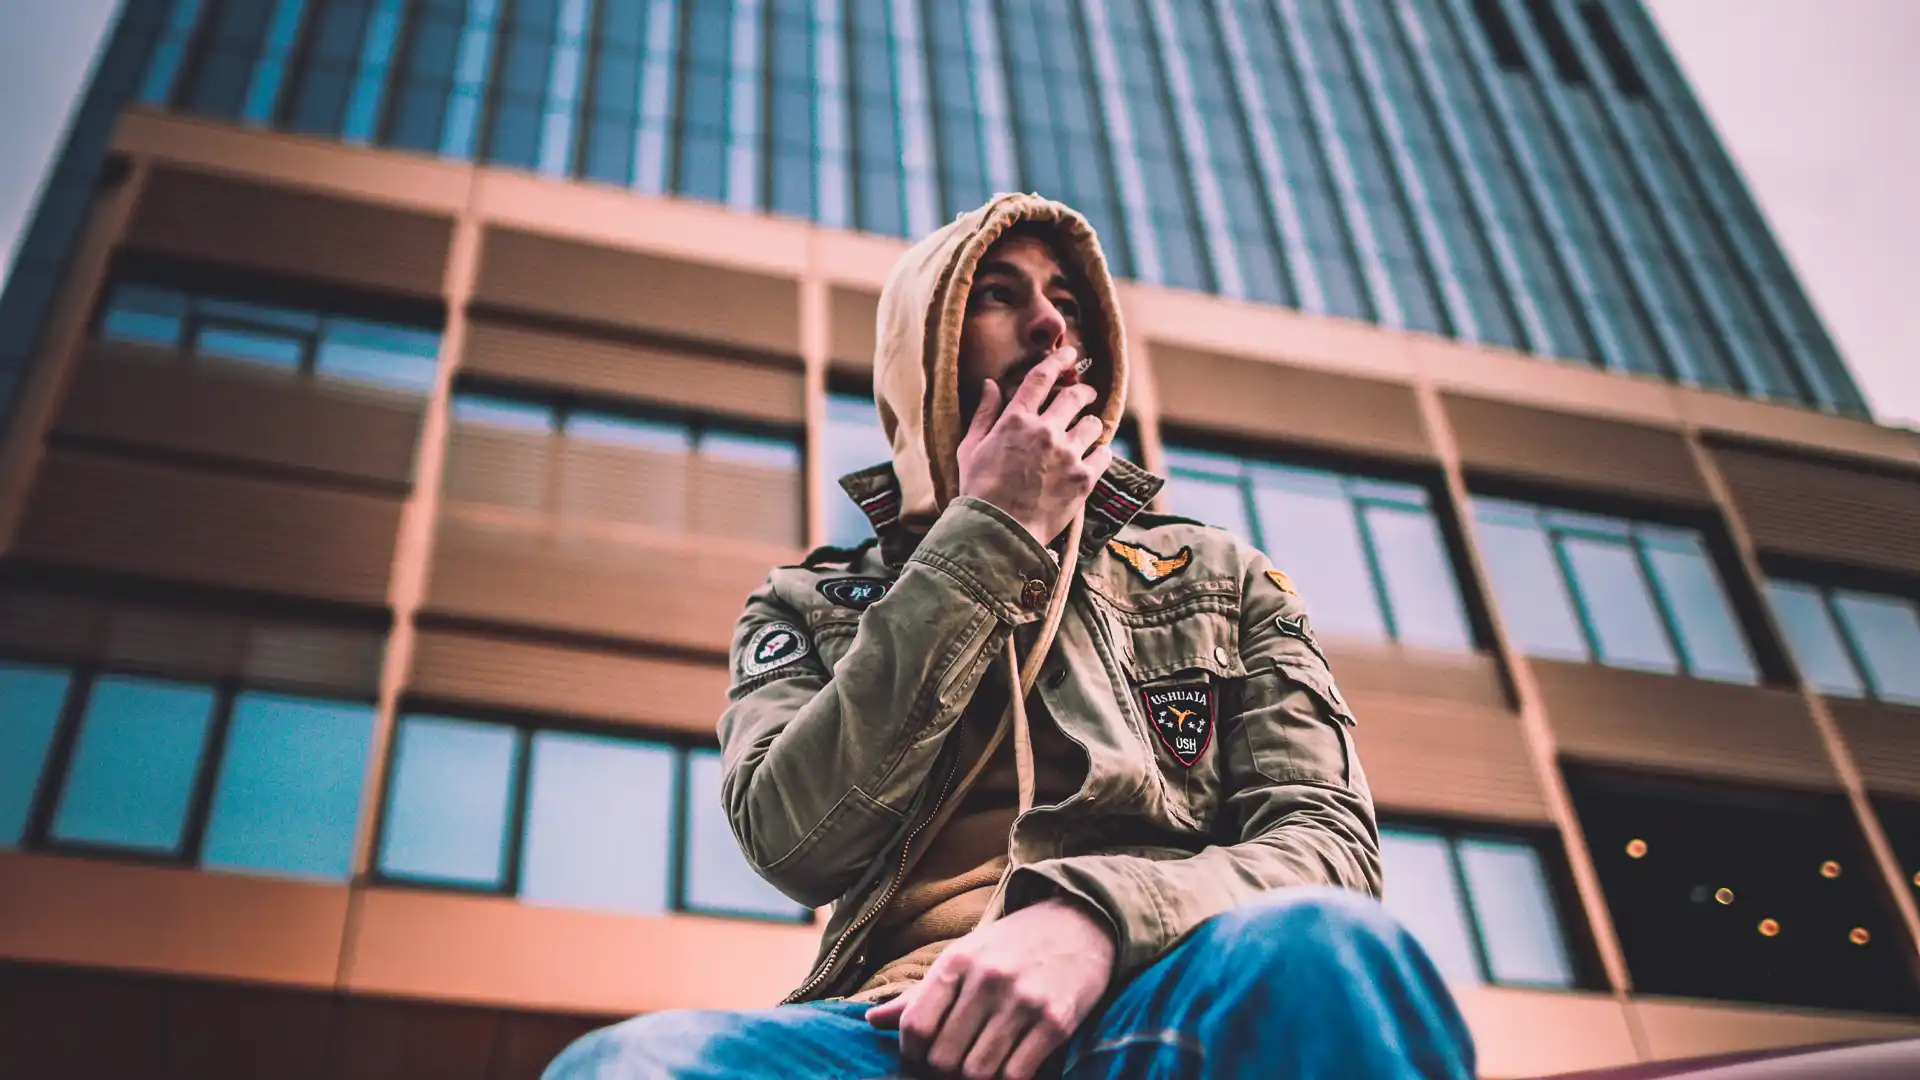 Capo Beatz posing in front of an urban office tower during a captivating photoshoot.